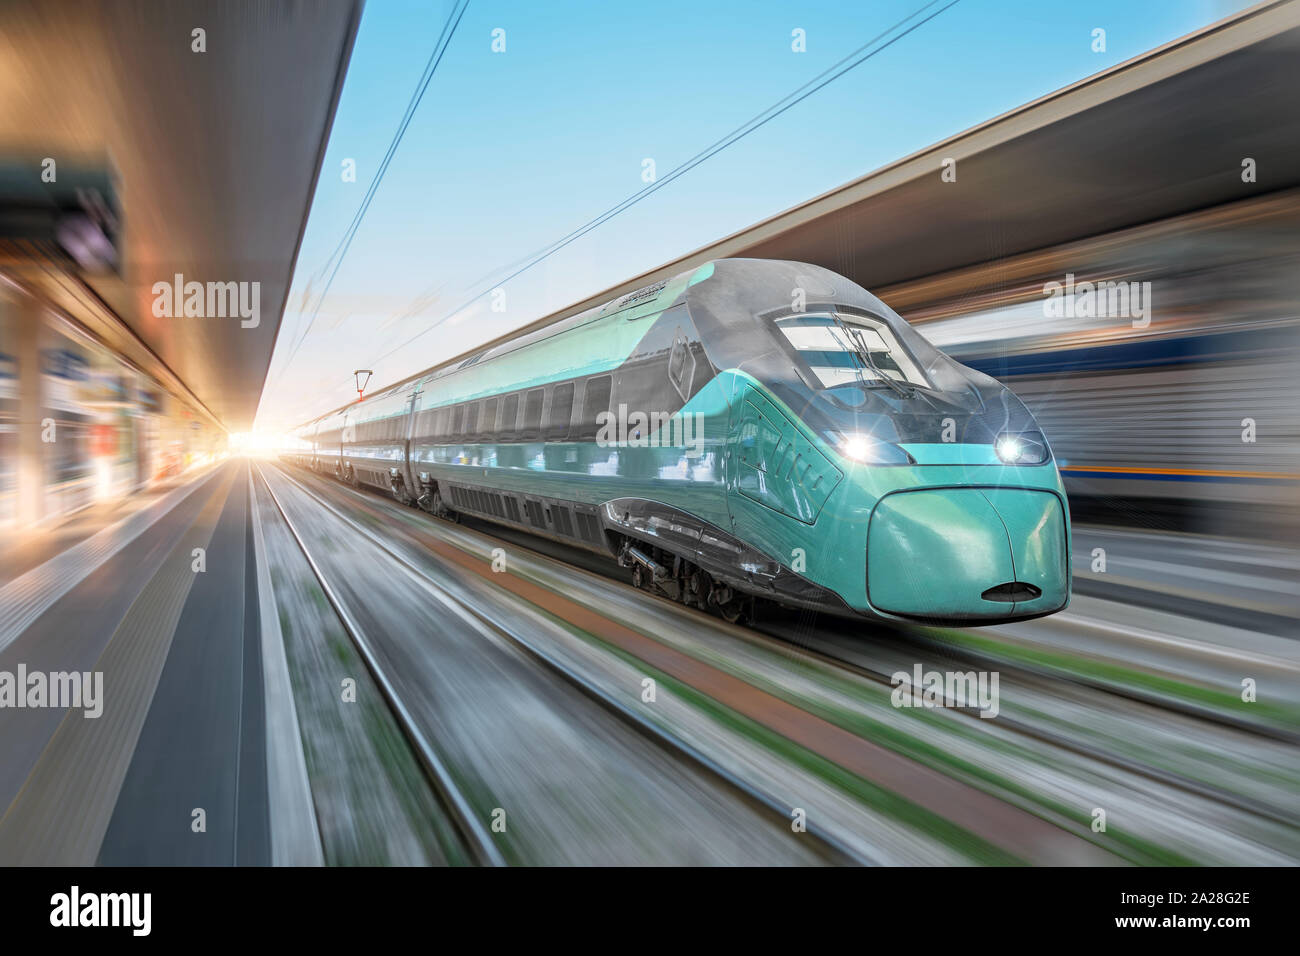 High speed train passing near the passenger station in the city. Stock Photo